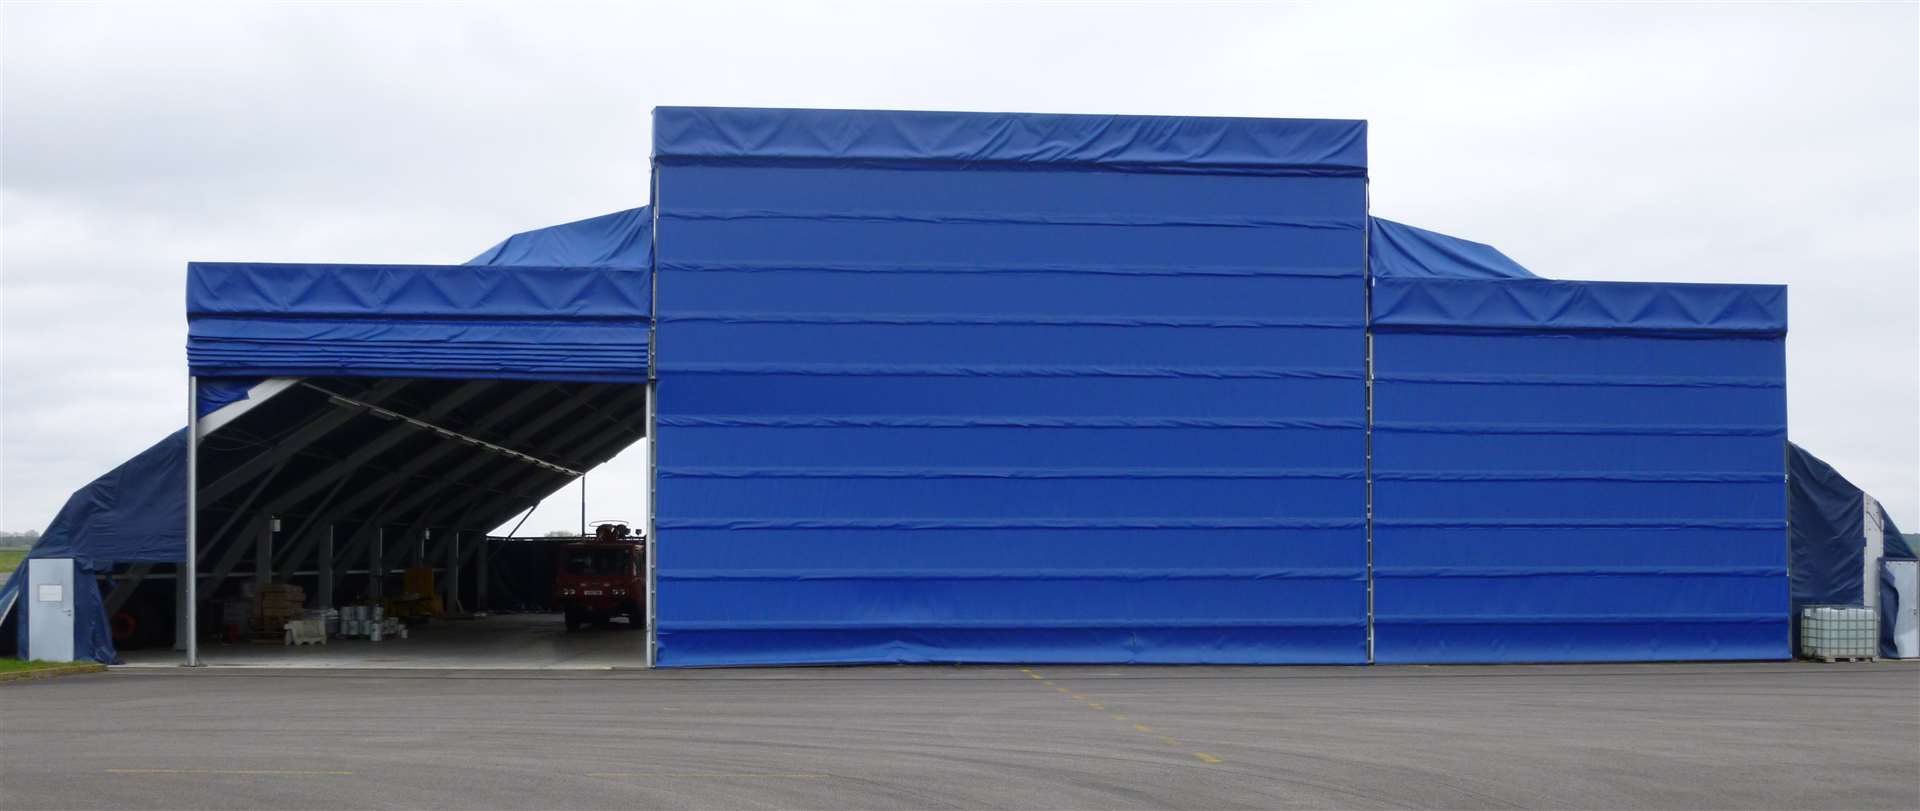 A fabric-framed hangar similar to that which will be installed at Lydd airport